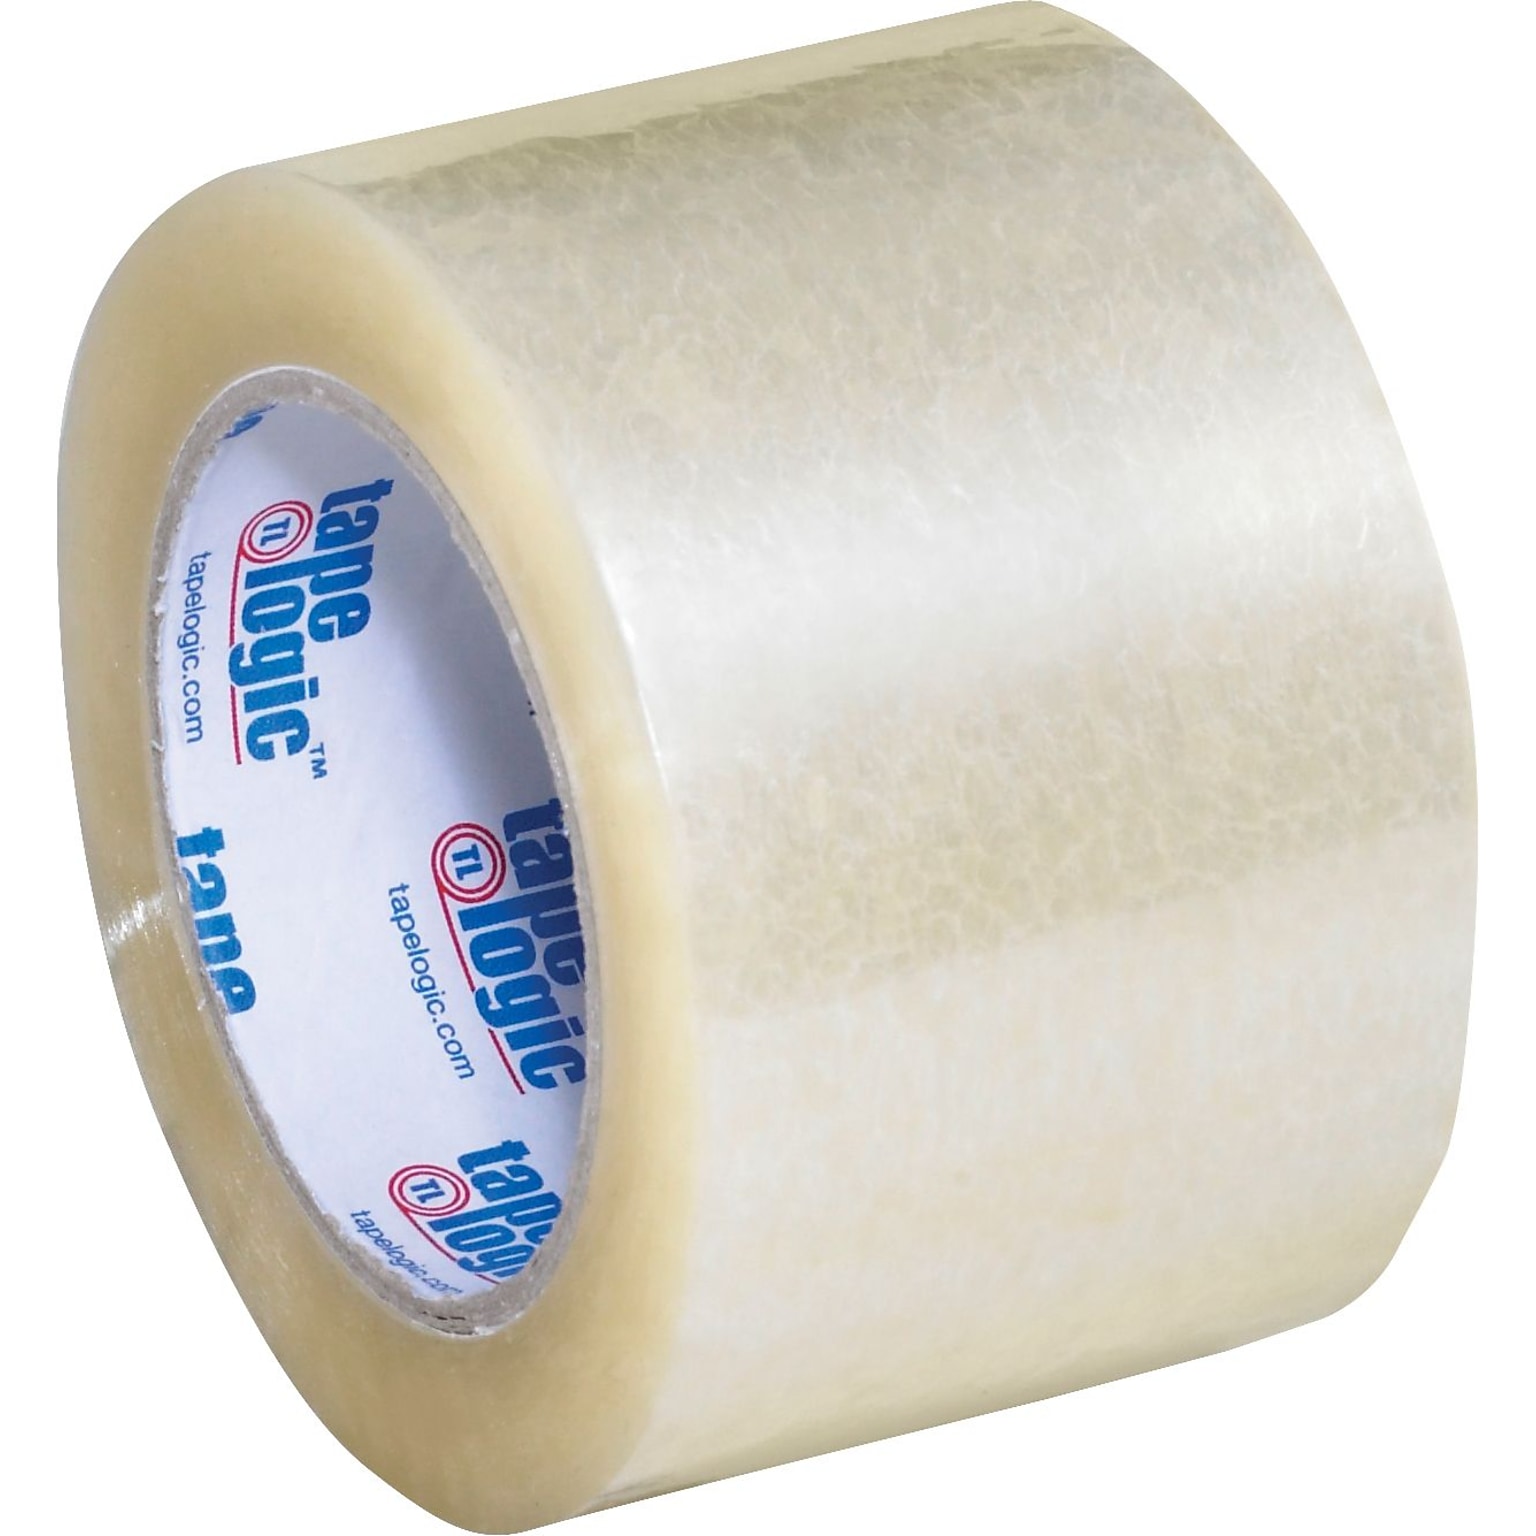 Tape Logic Acrylic Packing Tape, 3 x 110 yds., Clear, 24/Carton (T905400)